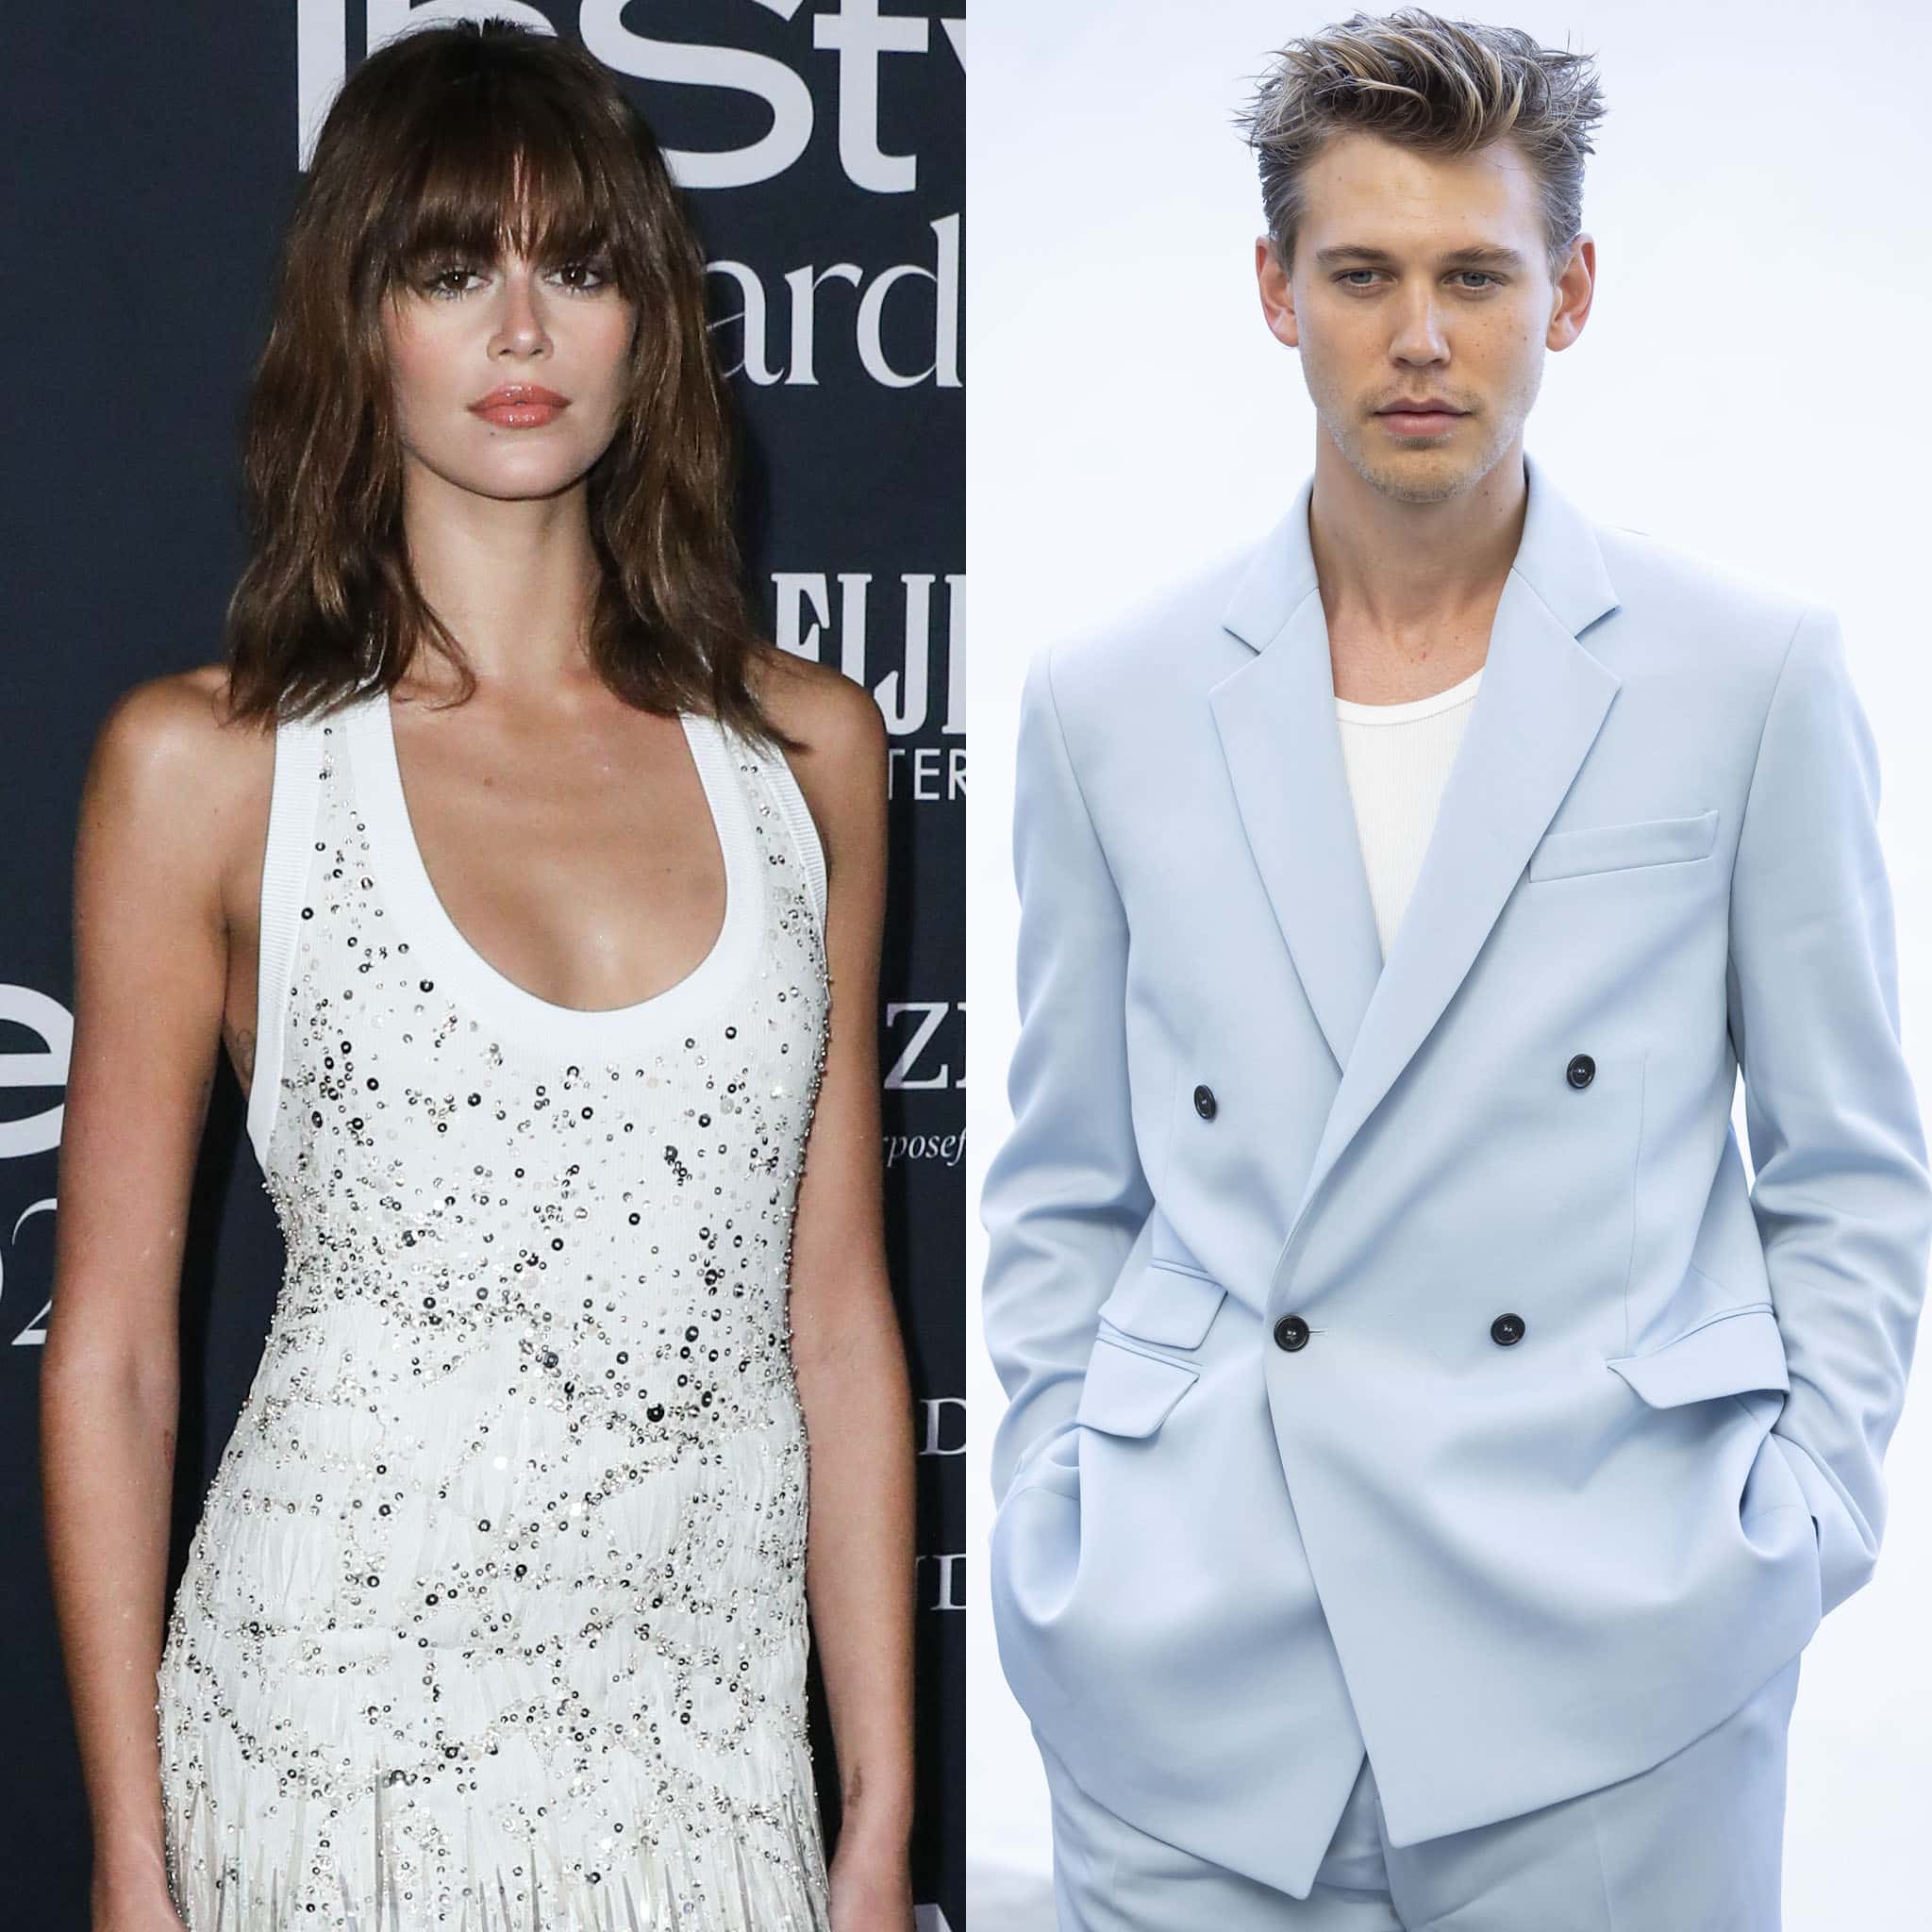 Kaia Gerber is rumored to be dating Austin Butler since December 2021 following her split from Jacob Elordi in November of the same year